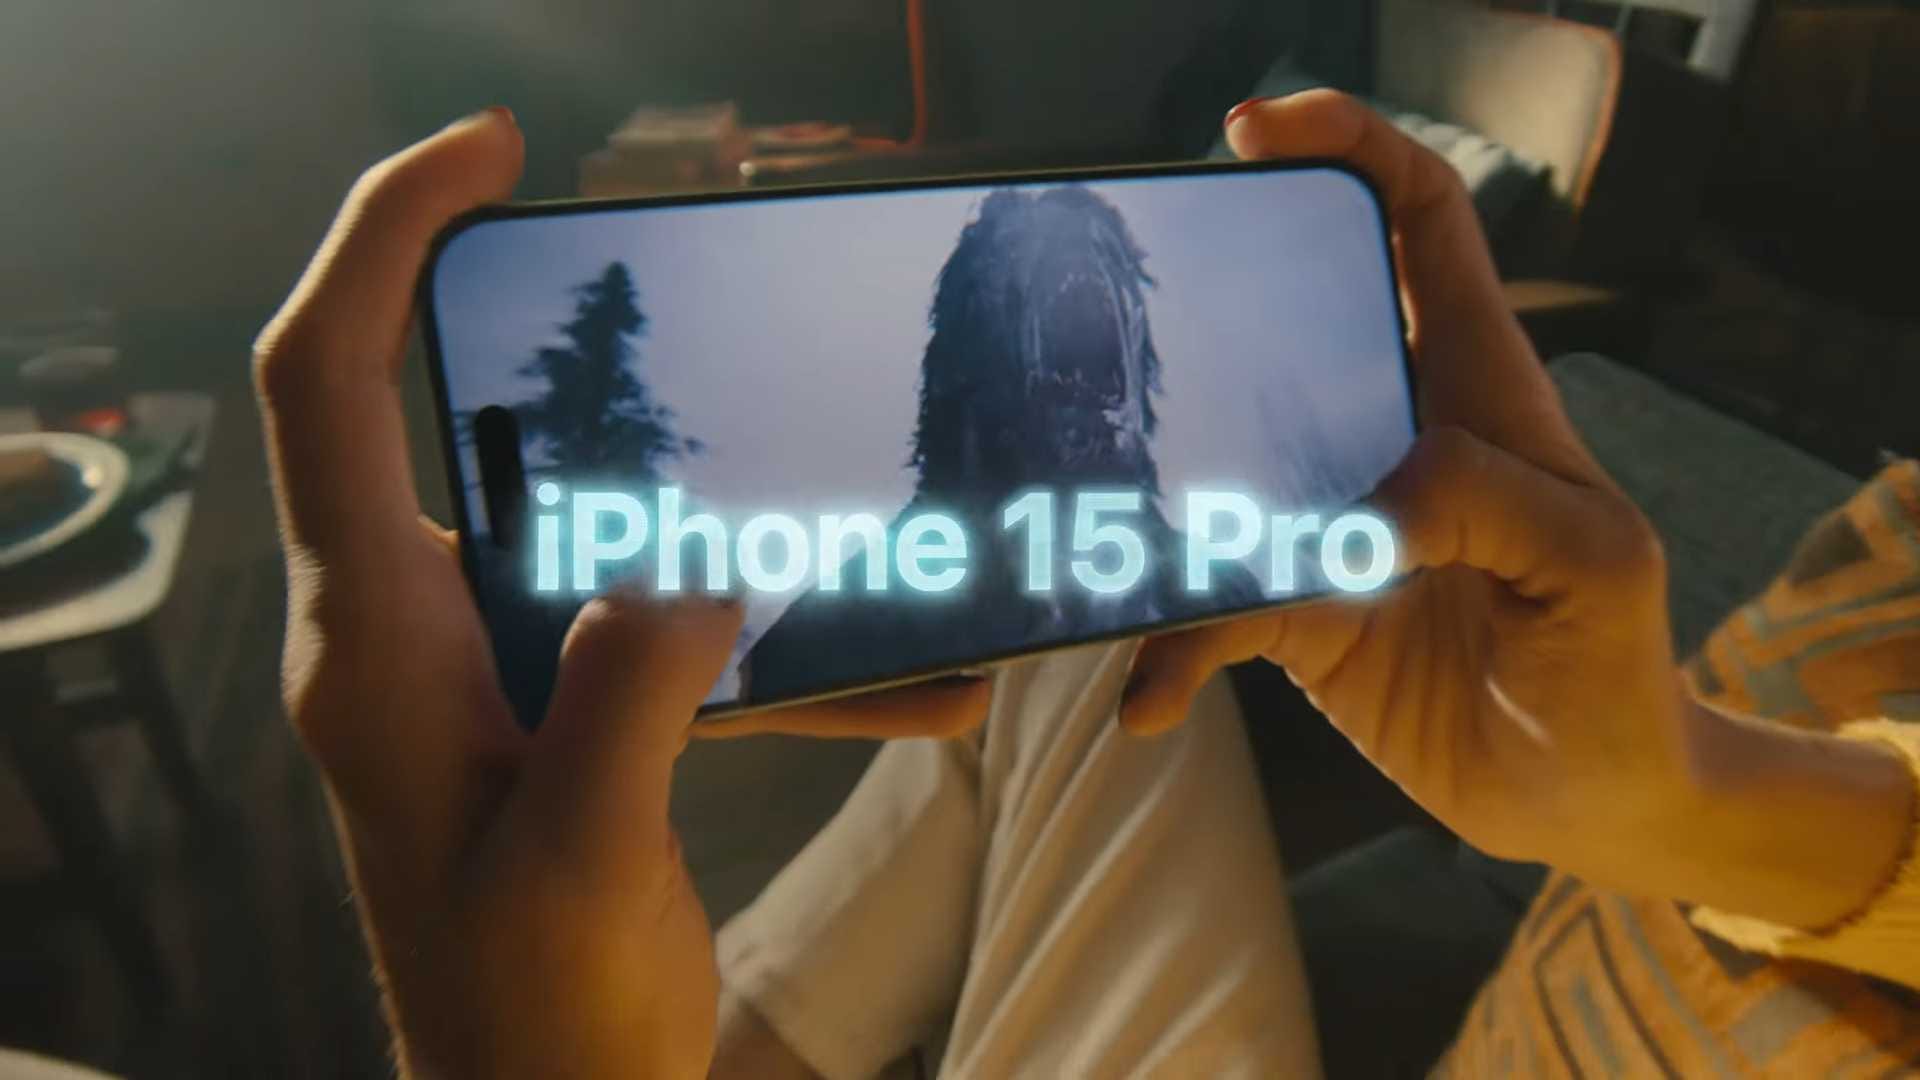 iPhone 15 Pro brings PS5 games to mobile – and it should worry Sony,  Microsoft and Nintendo